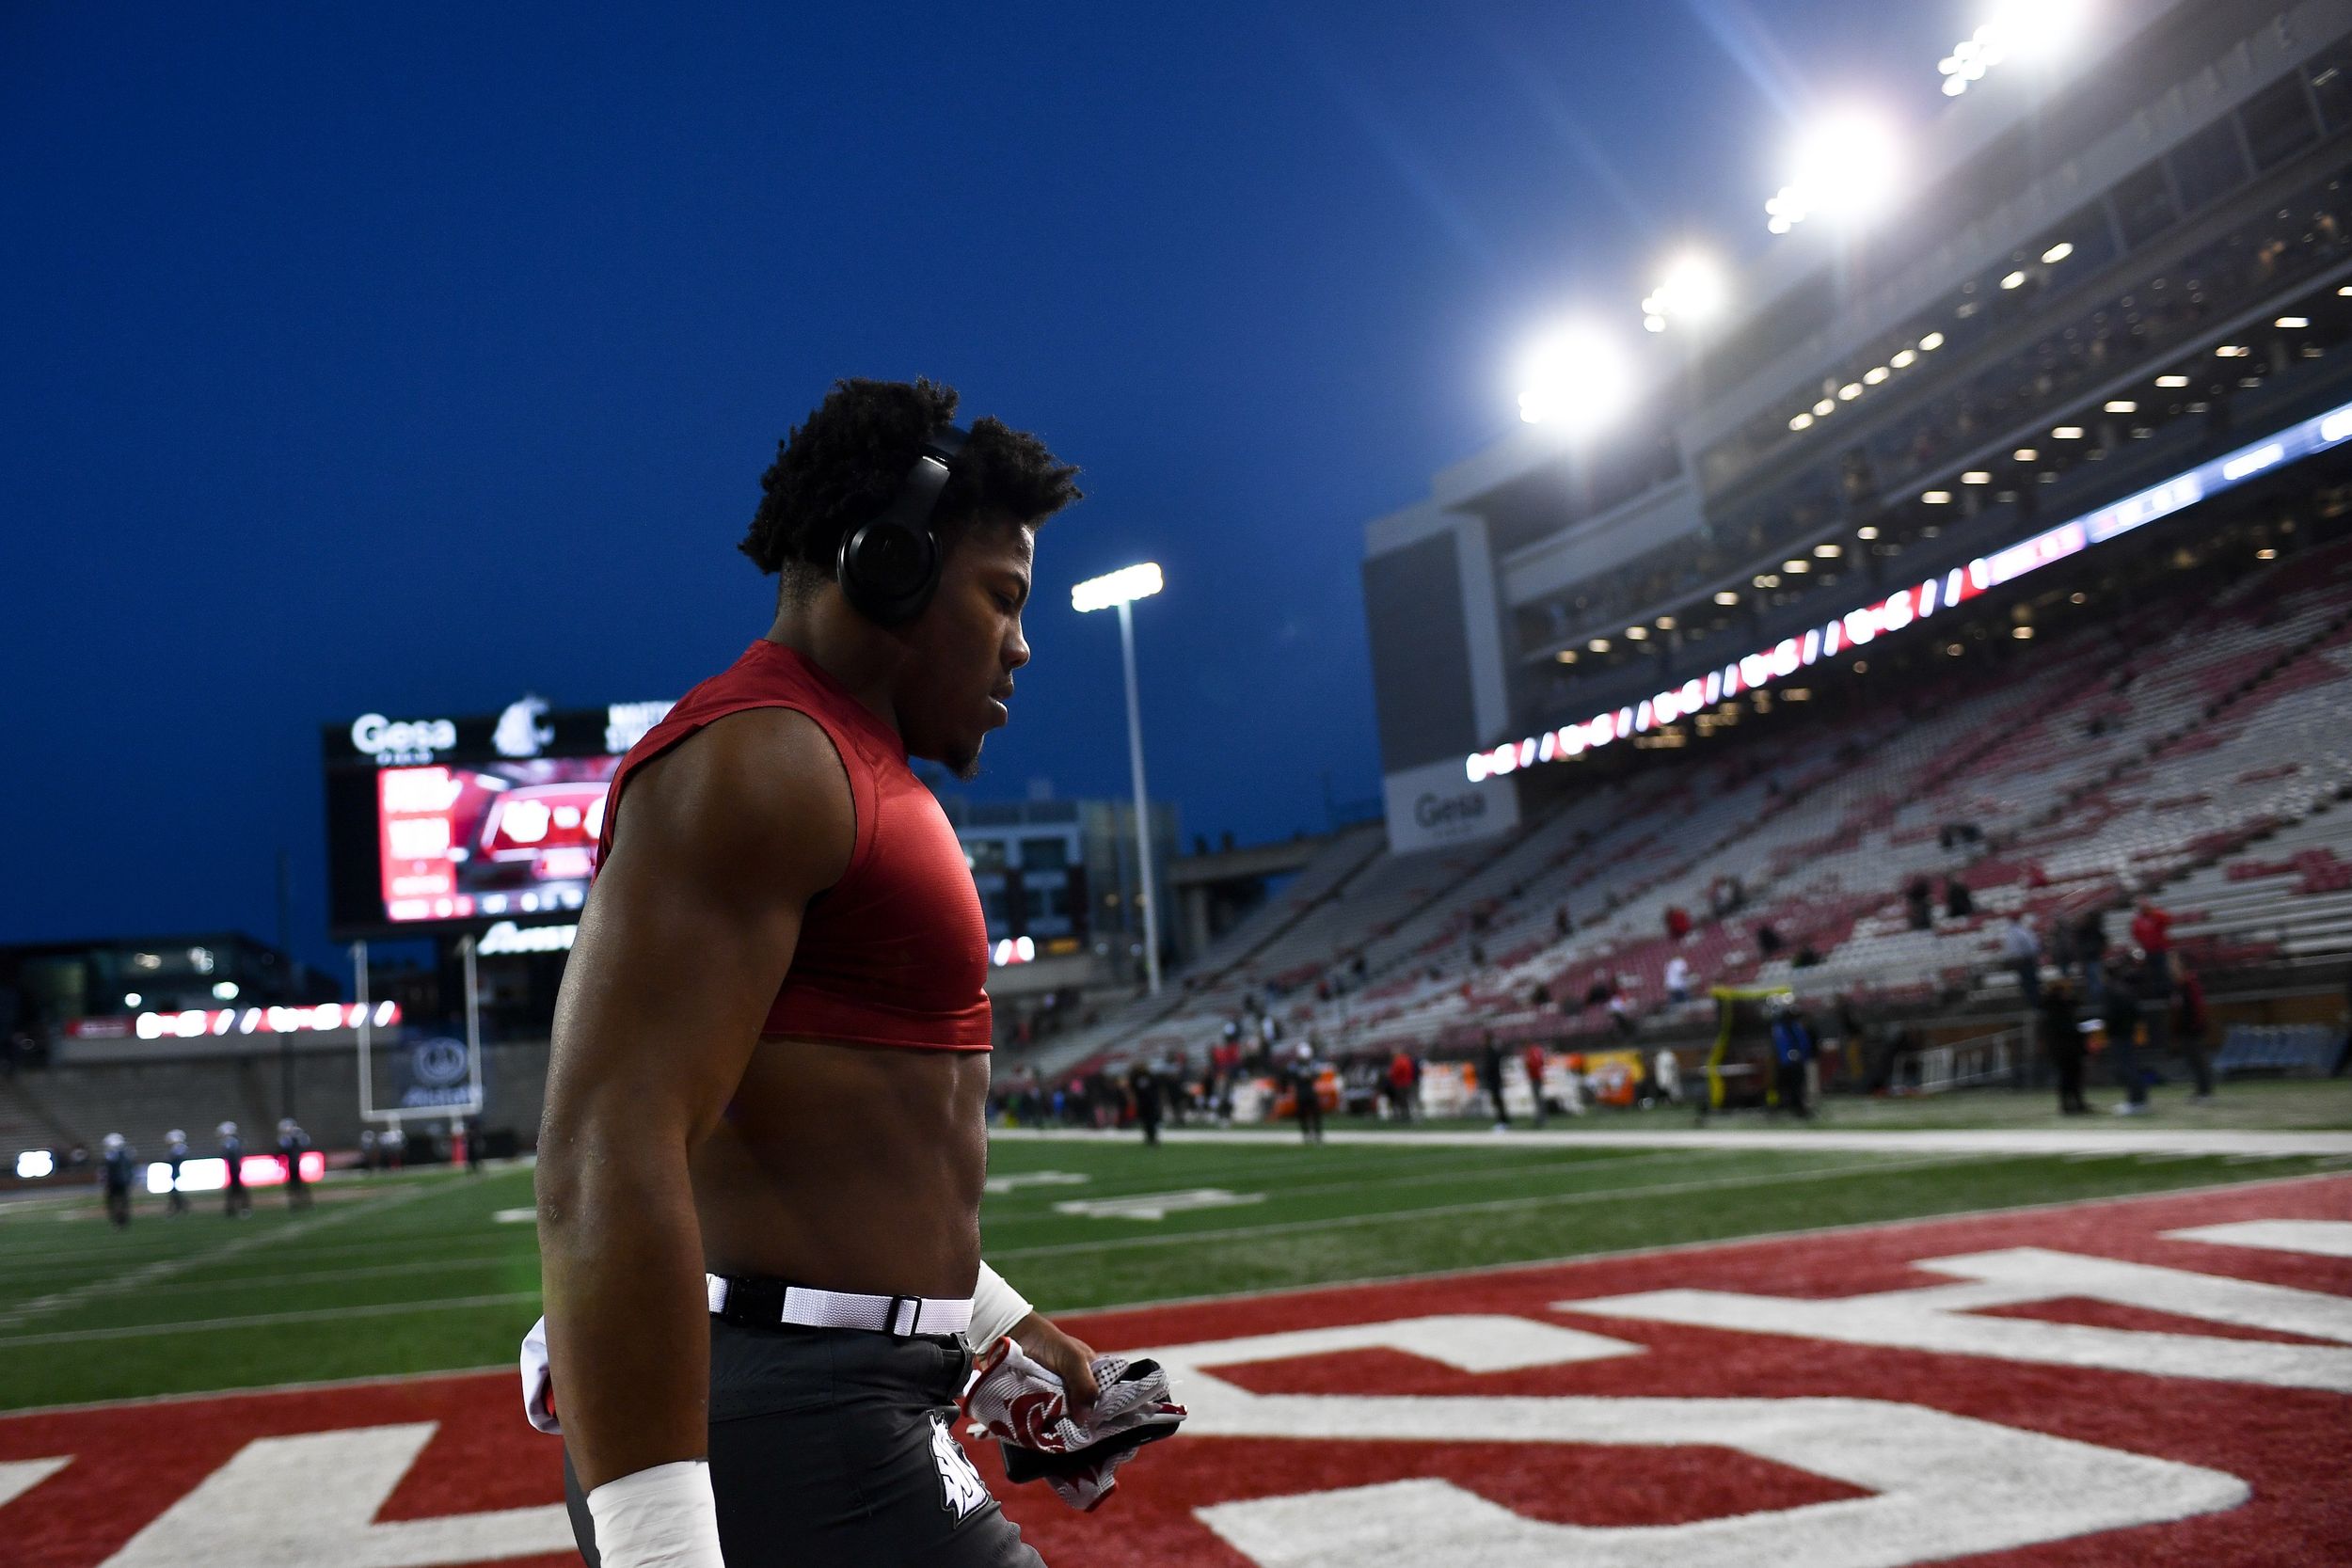 Washington State star linebacker Daiyan Henley, an NFL draft prospect, opts out of L.A. Bowl